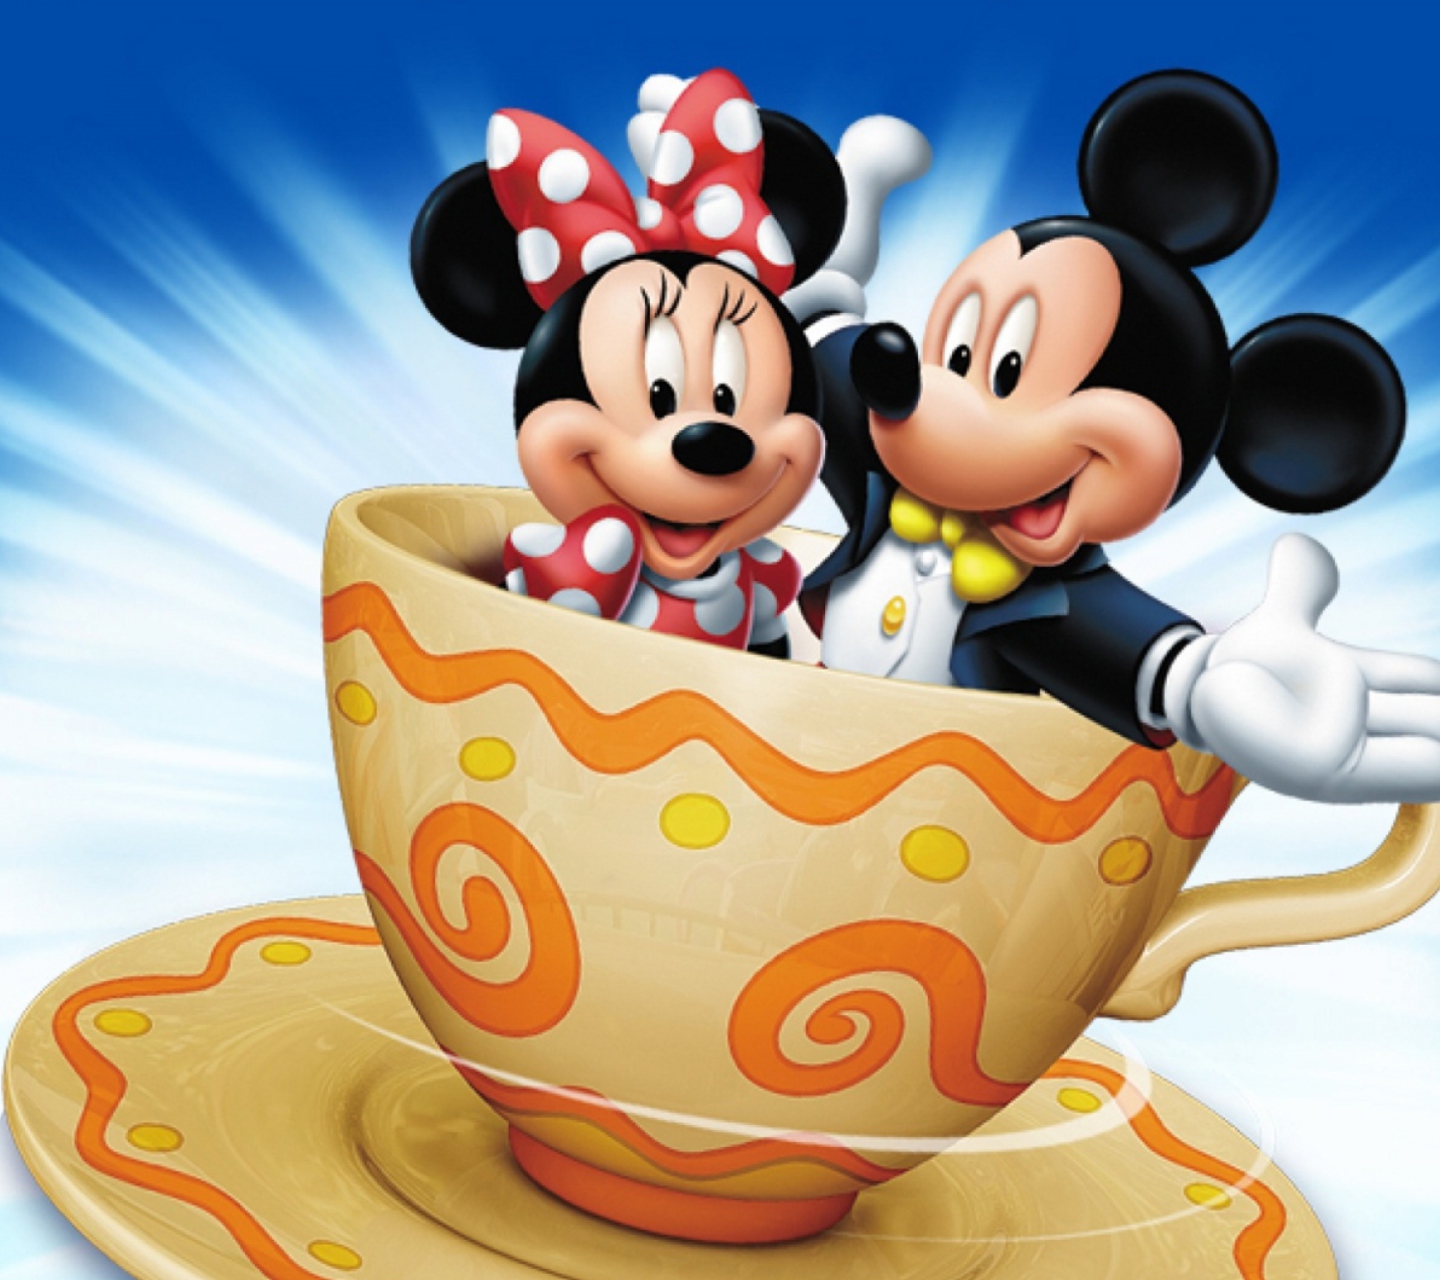 Mickey And Minnie Mouse In Cup screenshot #1 1440x1280